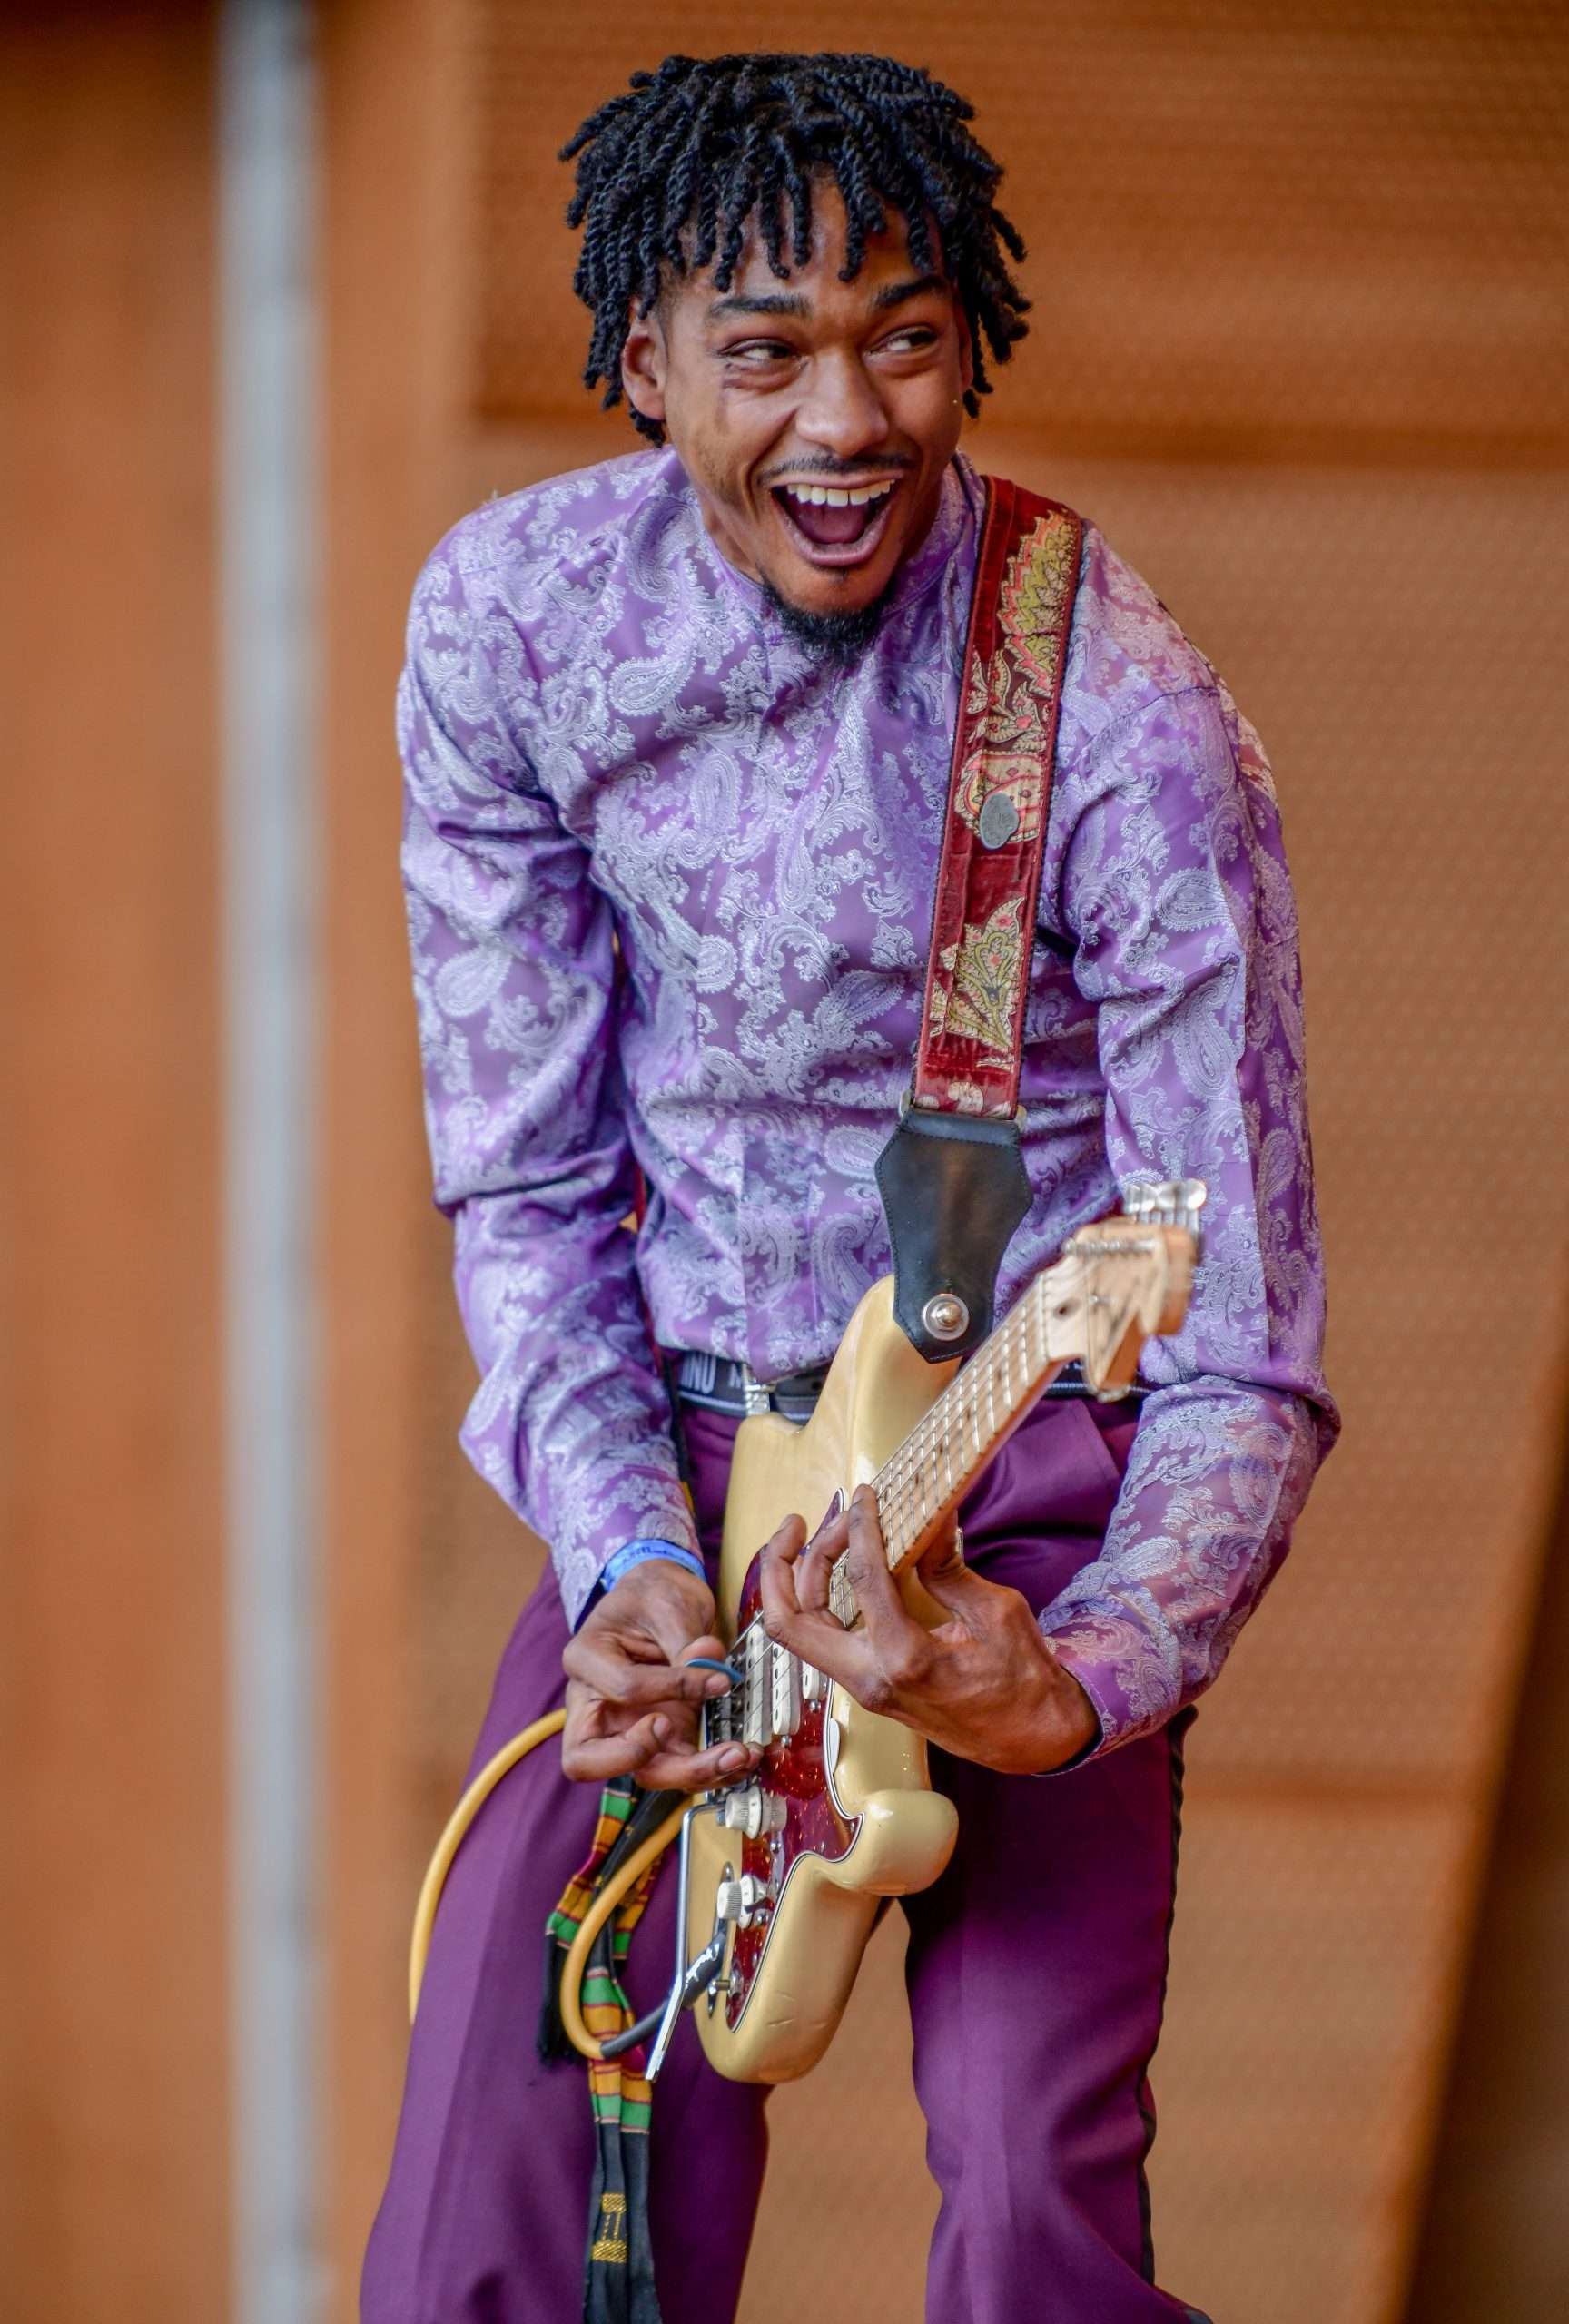 Jamiah Rogers Live At Chicago Blues Fest [GALLERY] 10